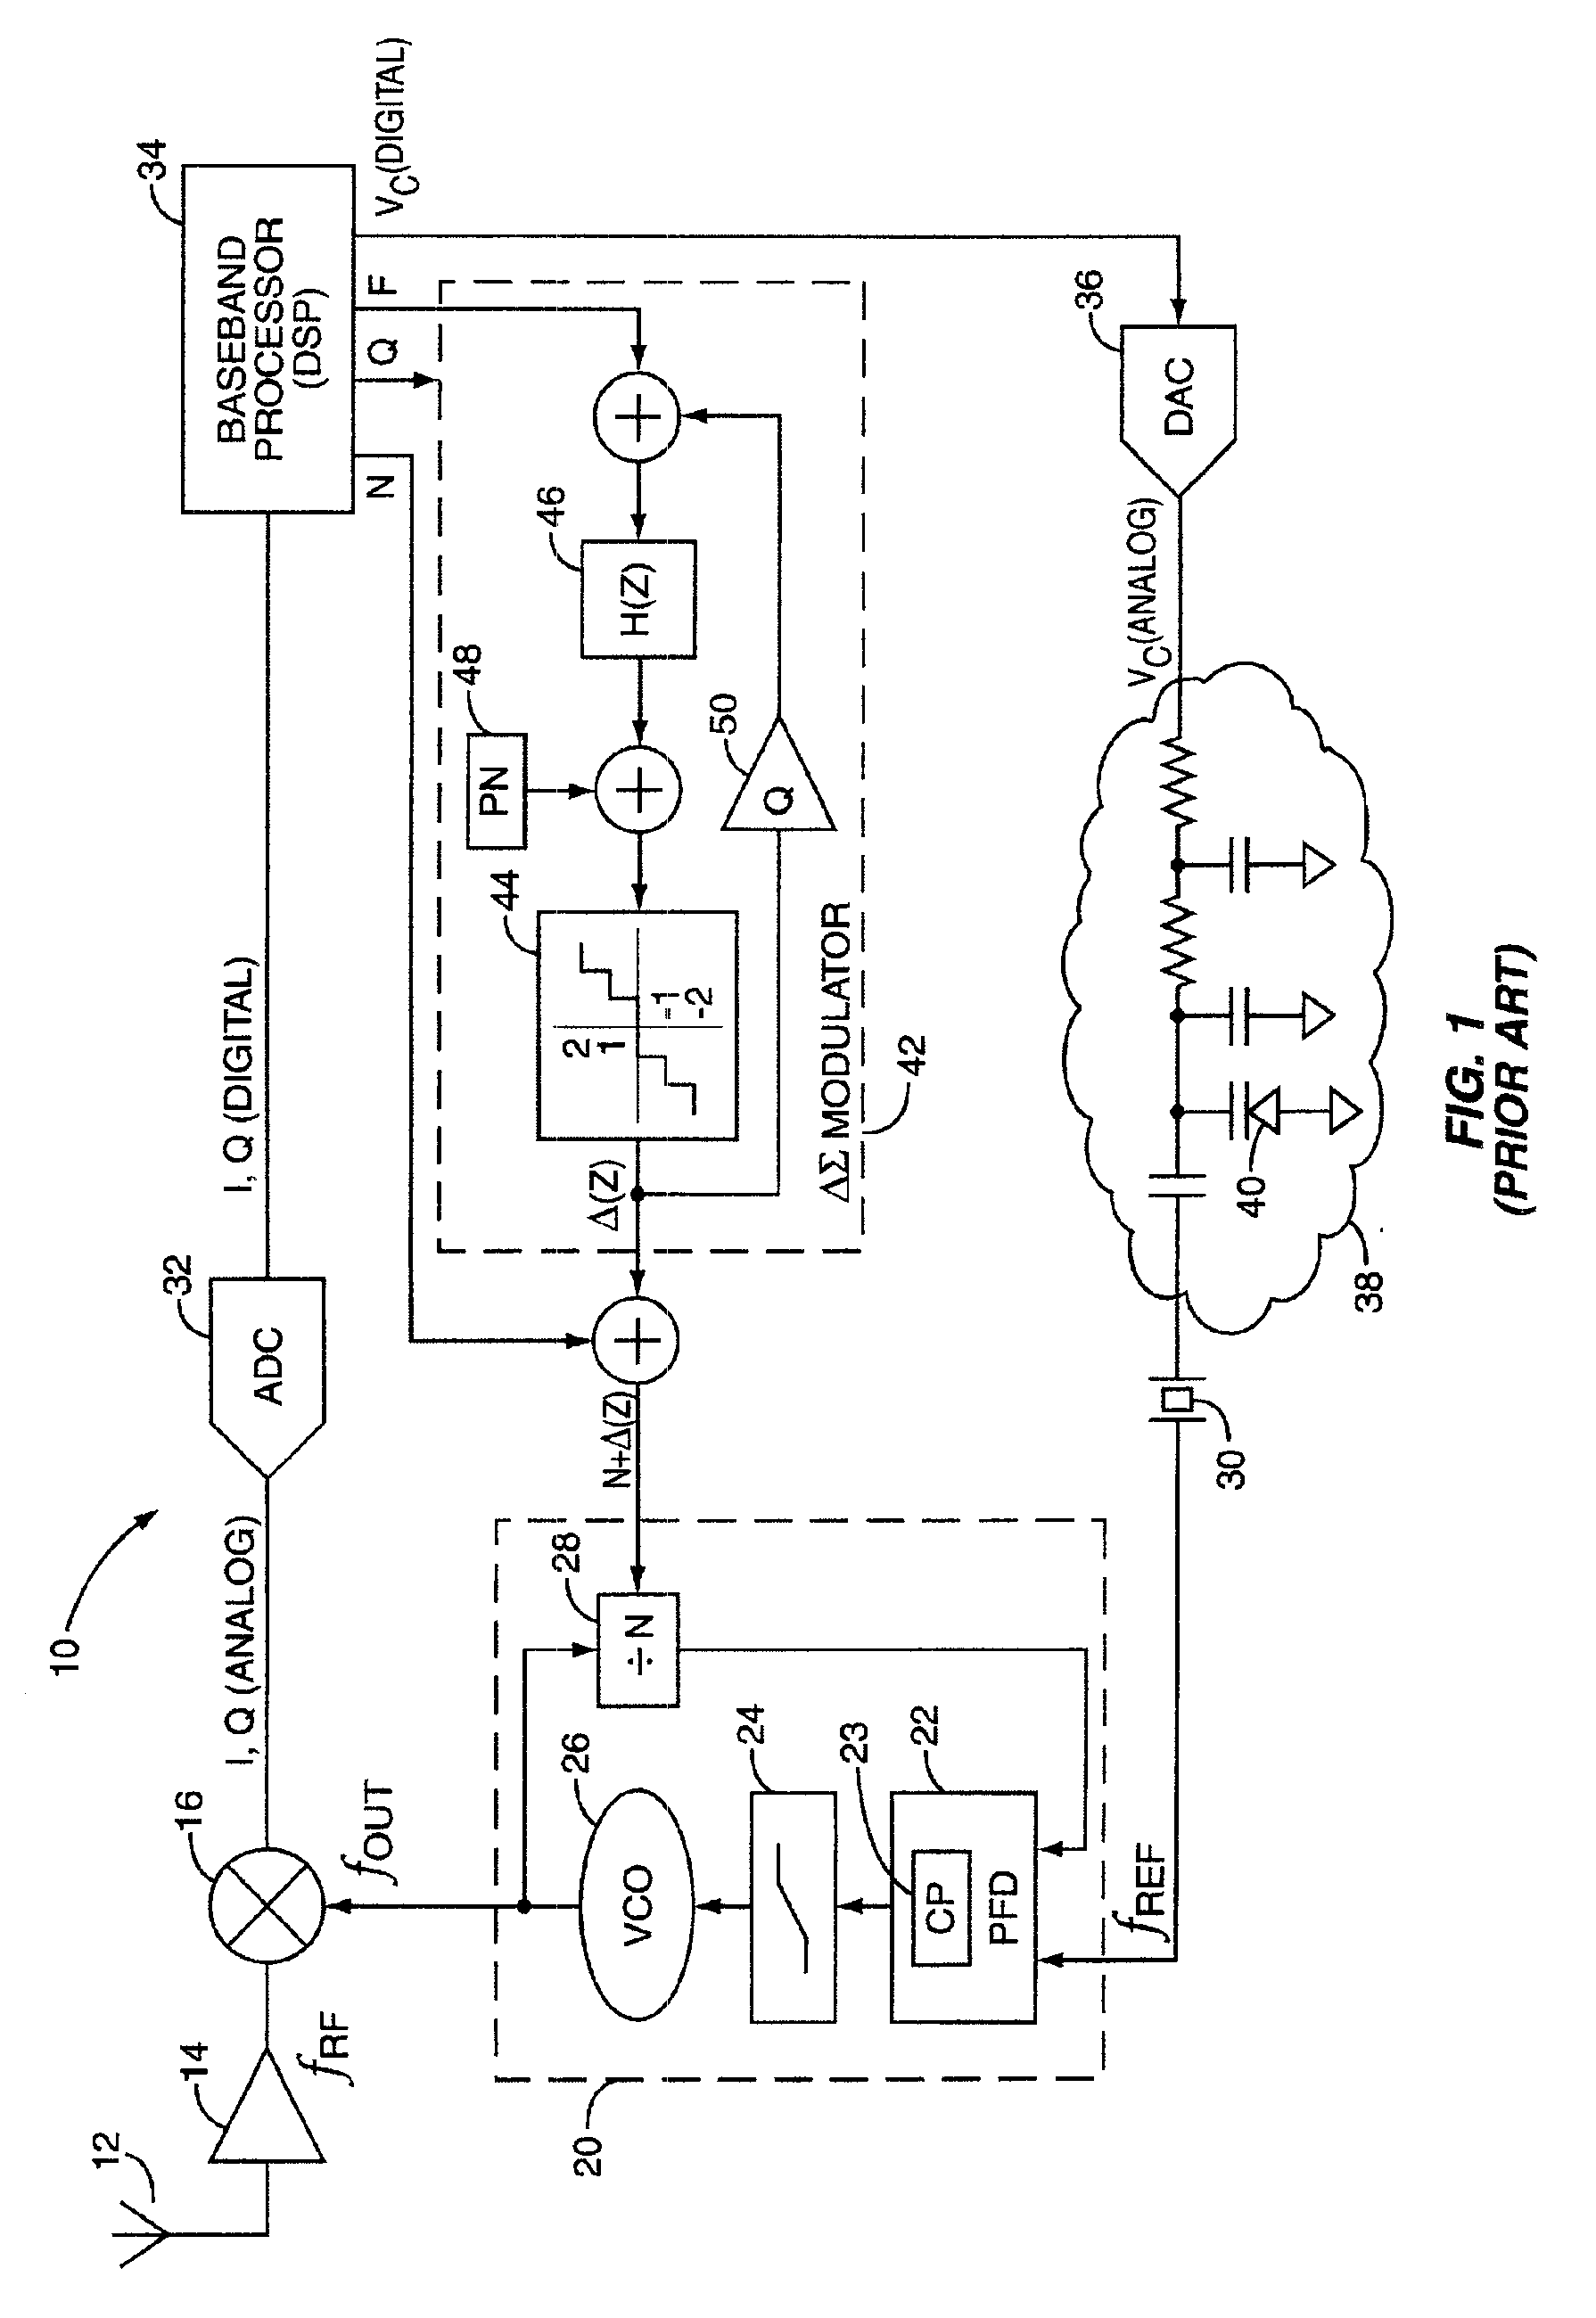 Direct automatic frequency control method and apparatus